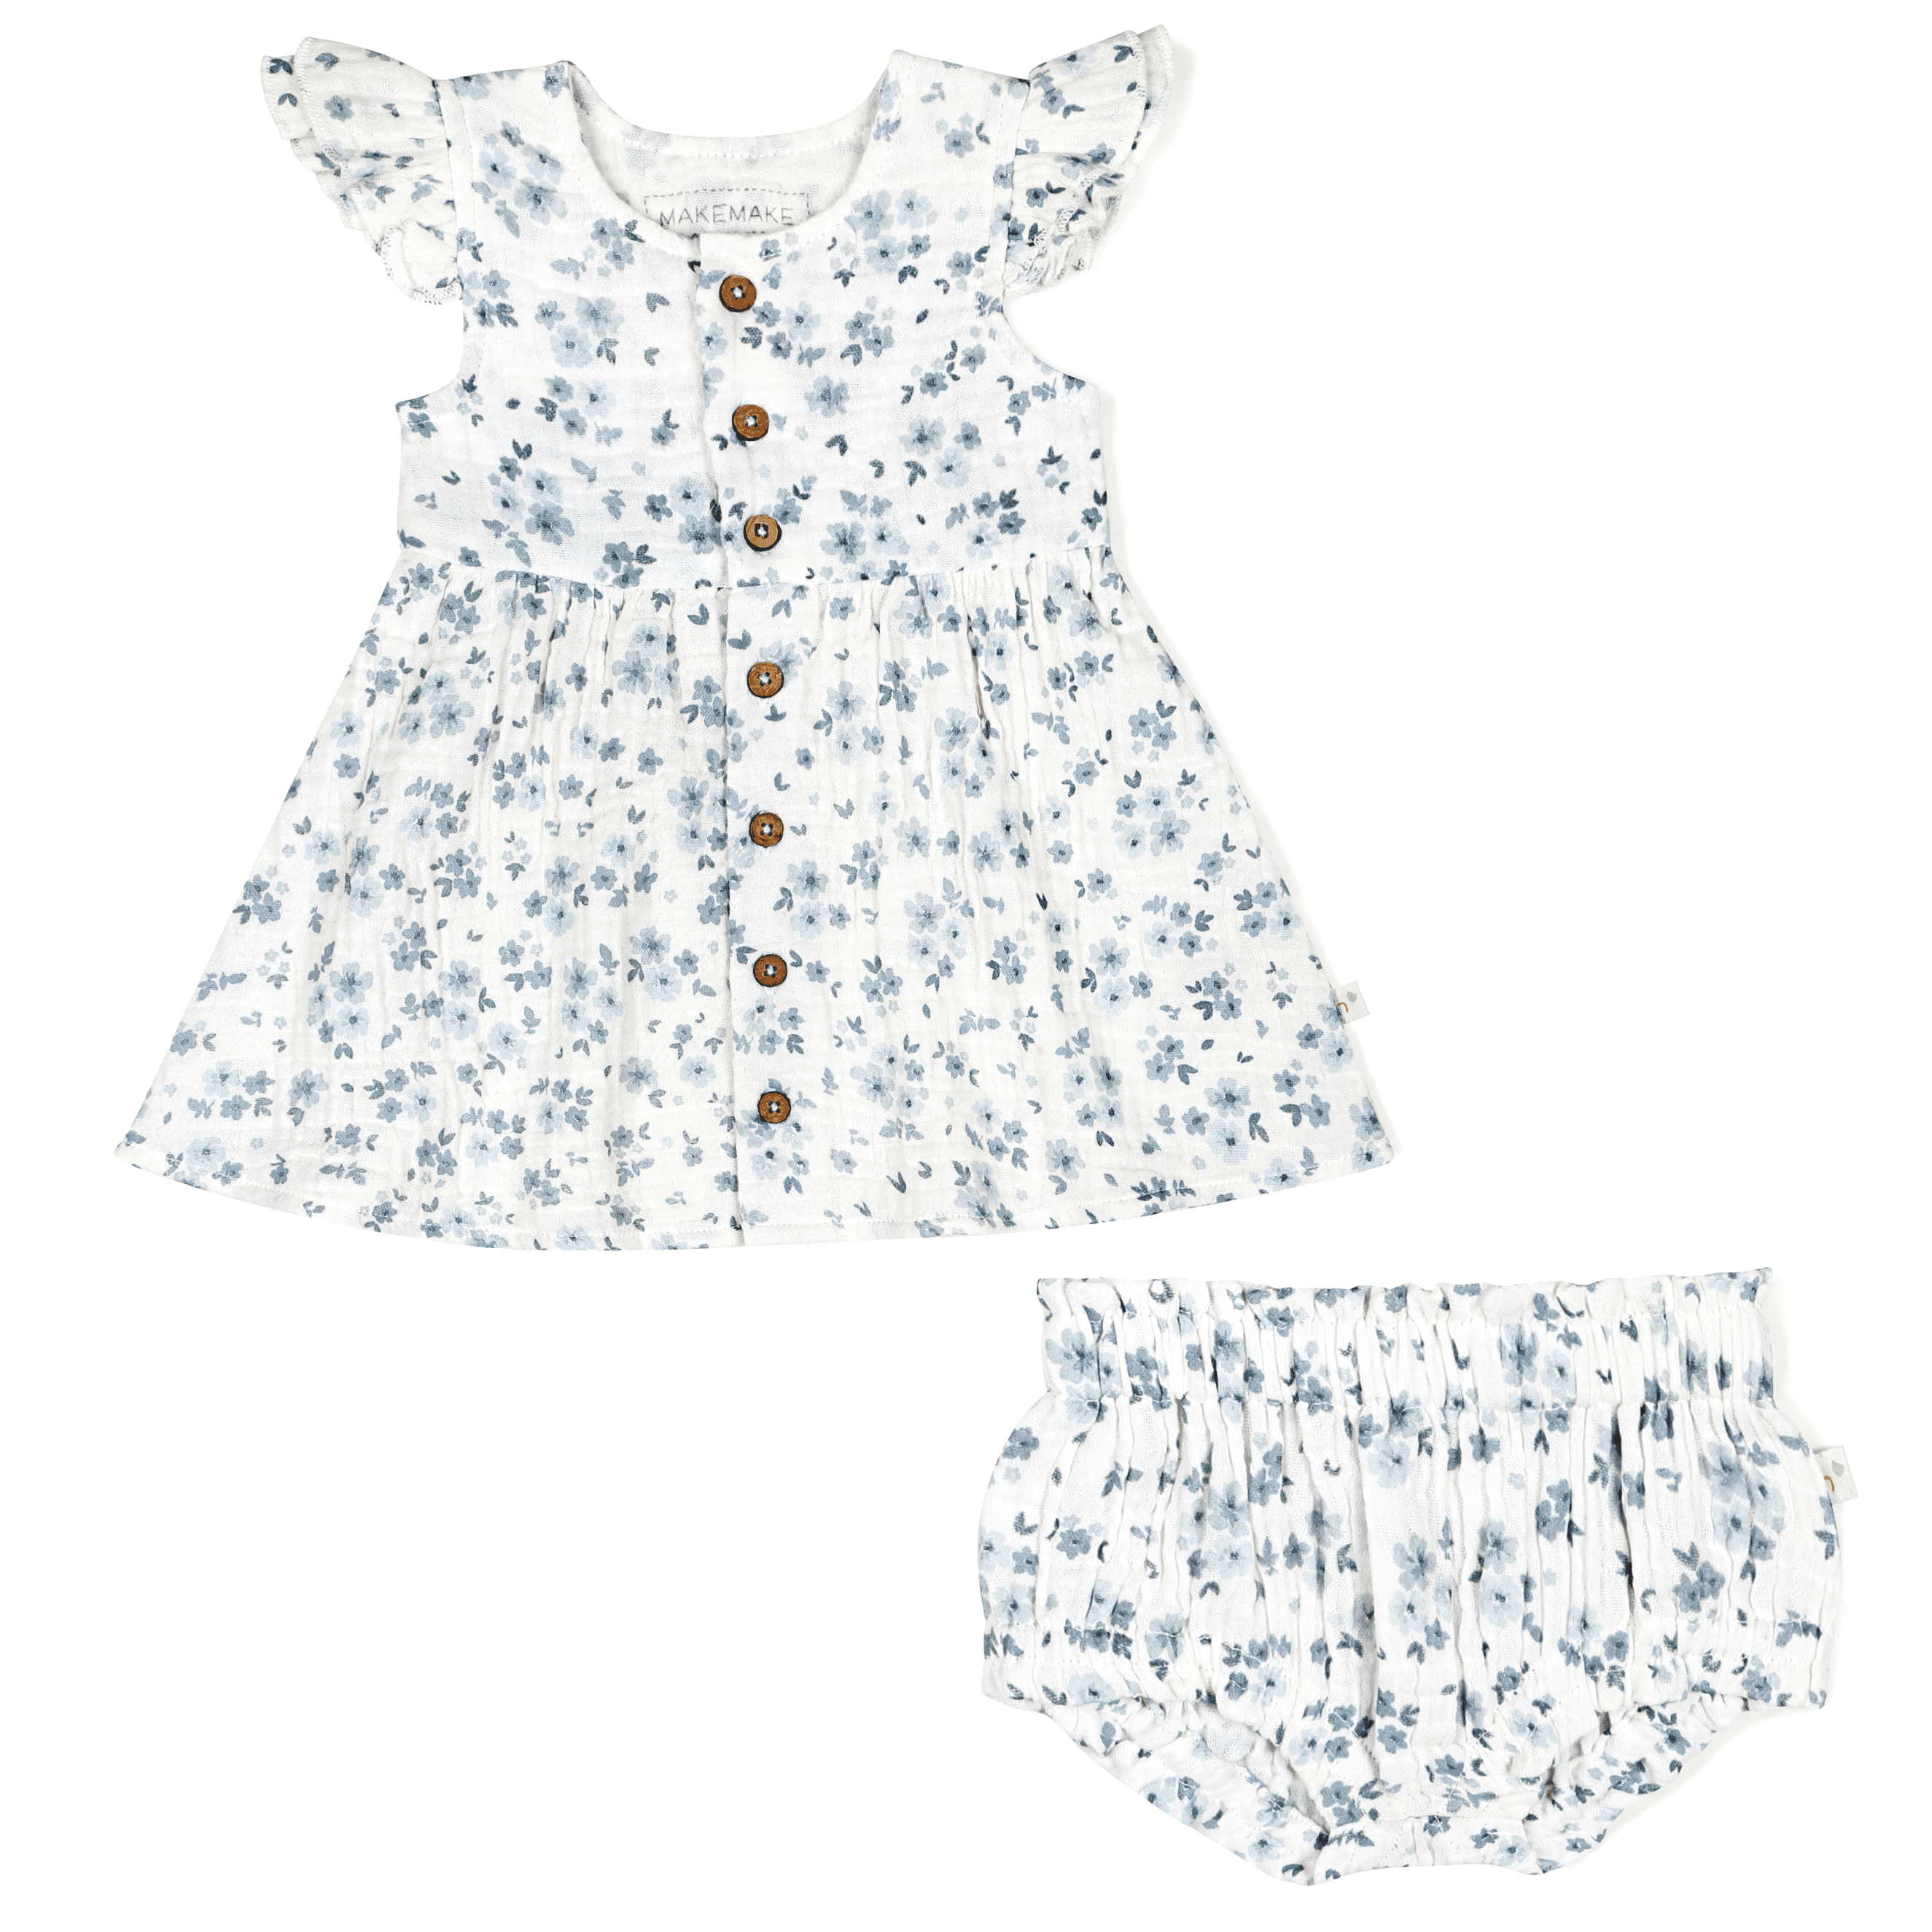 A white floral patterned baby girl dress with ruffled sleeves and matching bloomers, featuring front brown buttons, displayed on a white background. 

Replace with: Organic Muslin Button Flutter Dress - Periwinkle by Makemake Organics